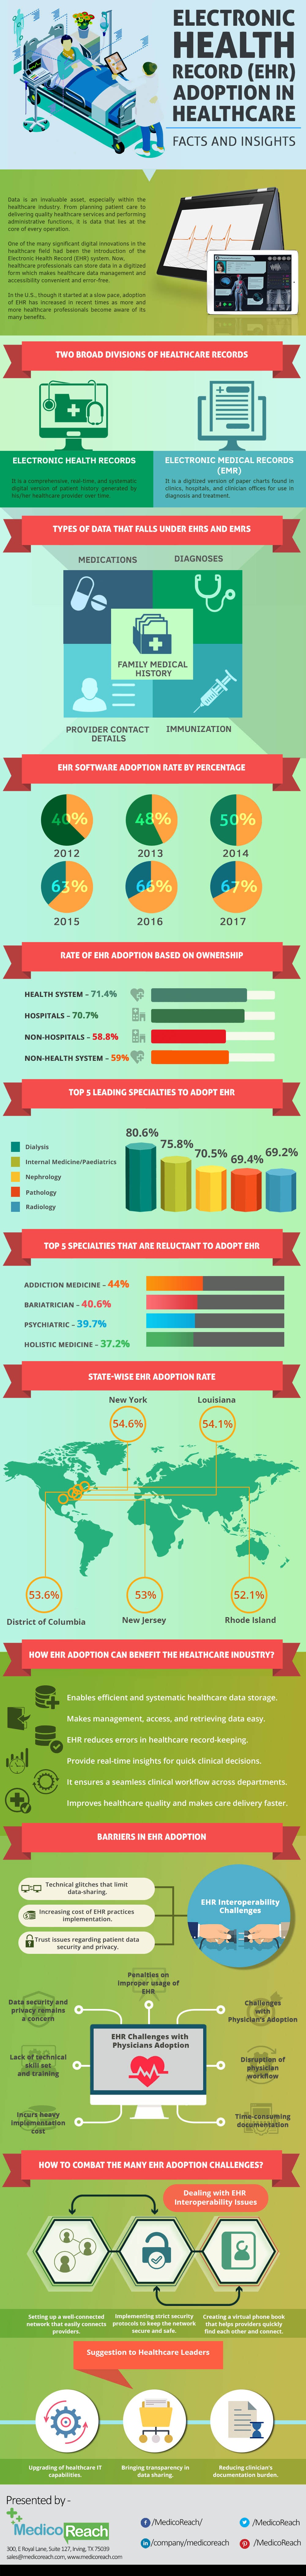 EHR Adoption Insights In Healthcare